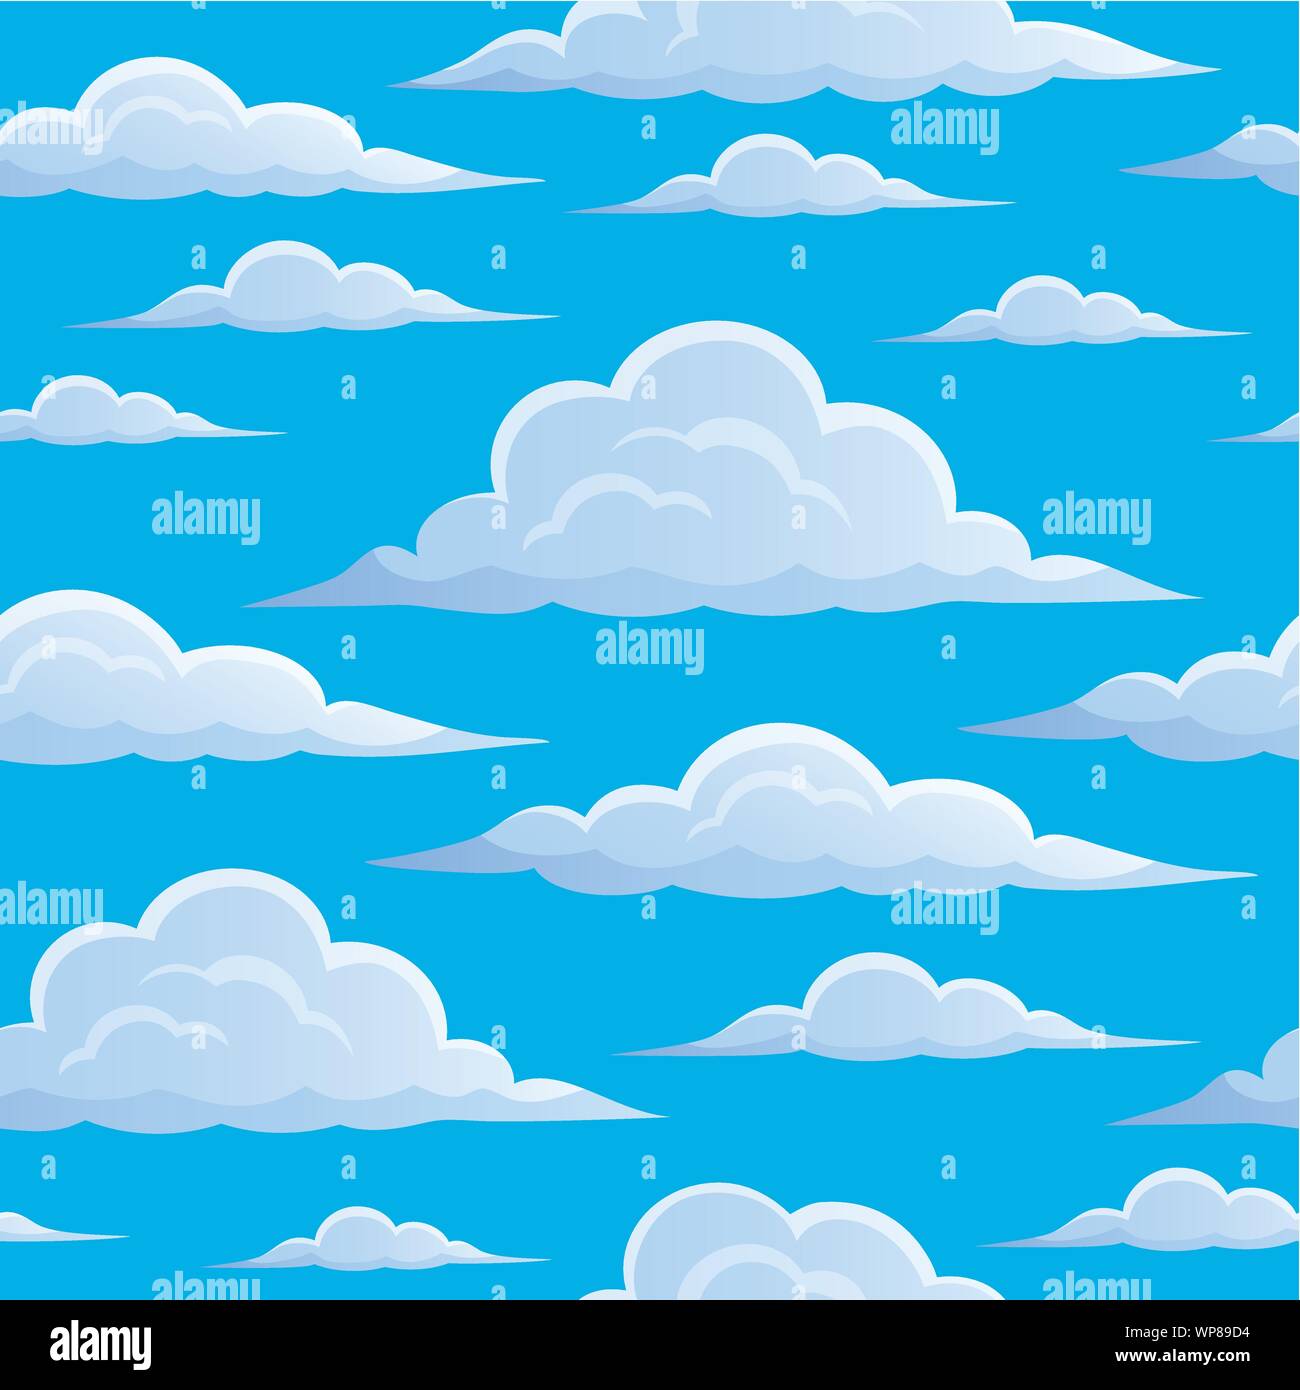 Clouds on blue sky seamless background 1 Stock Vector